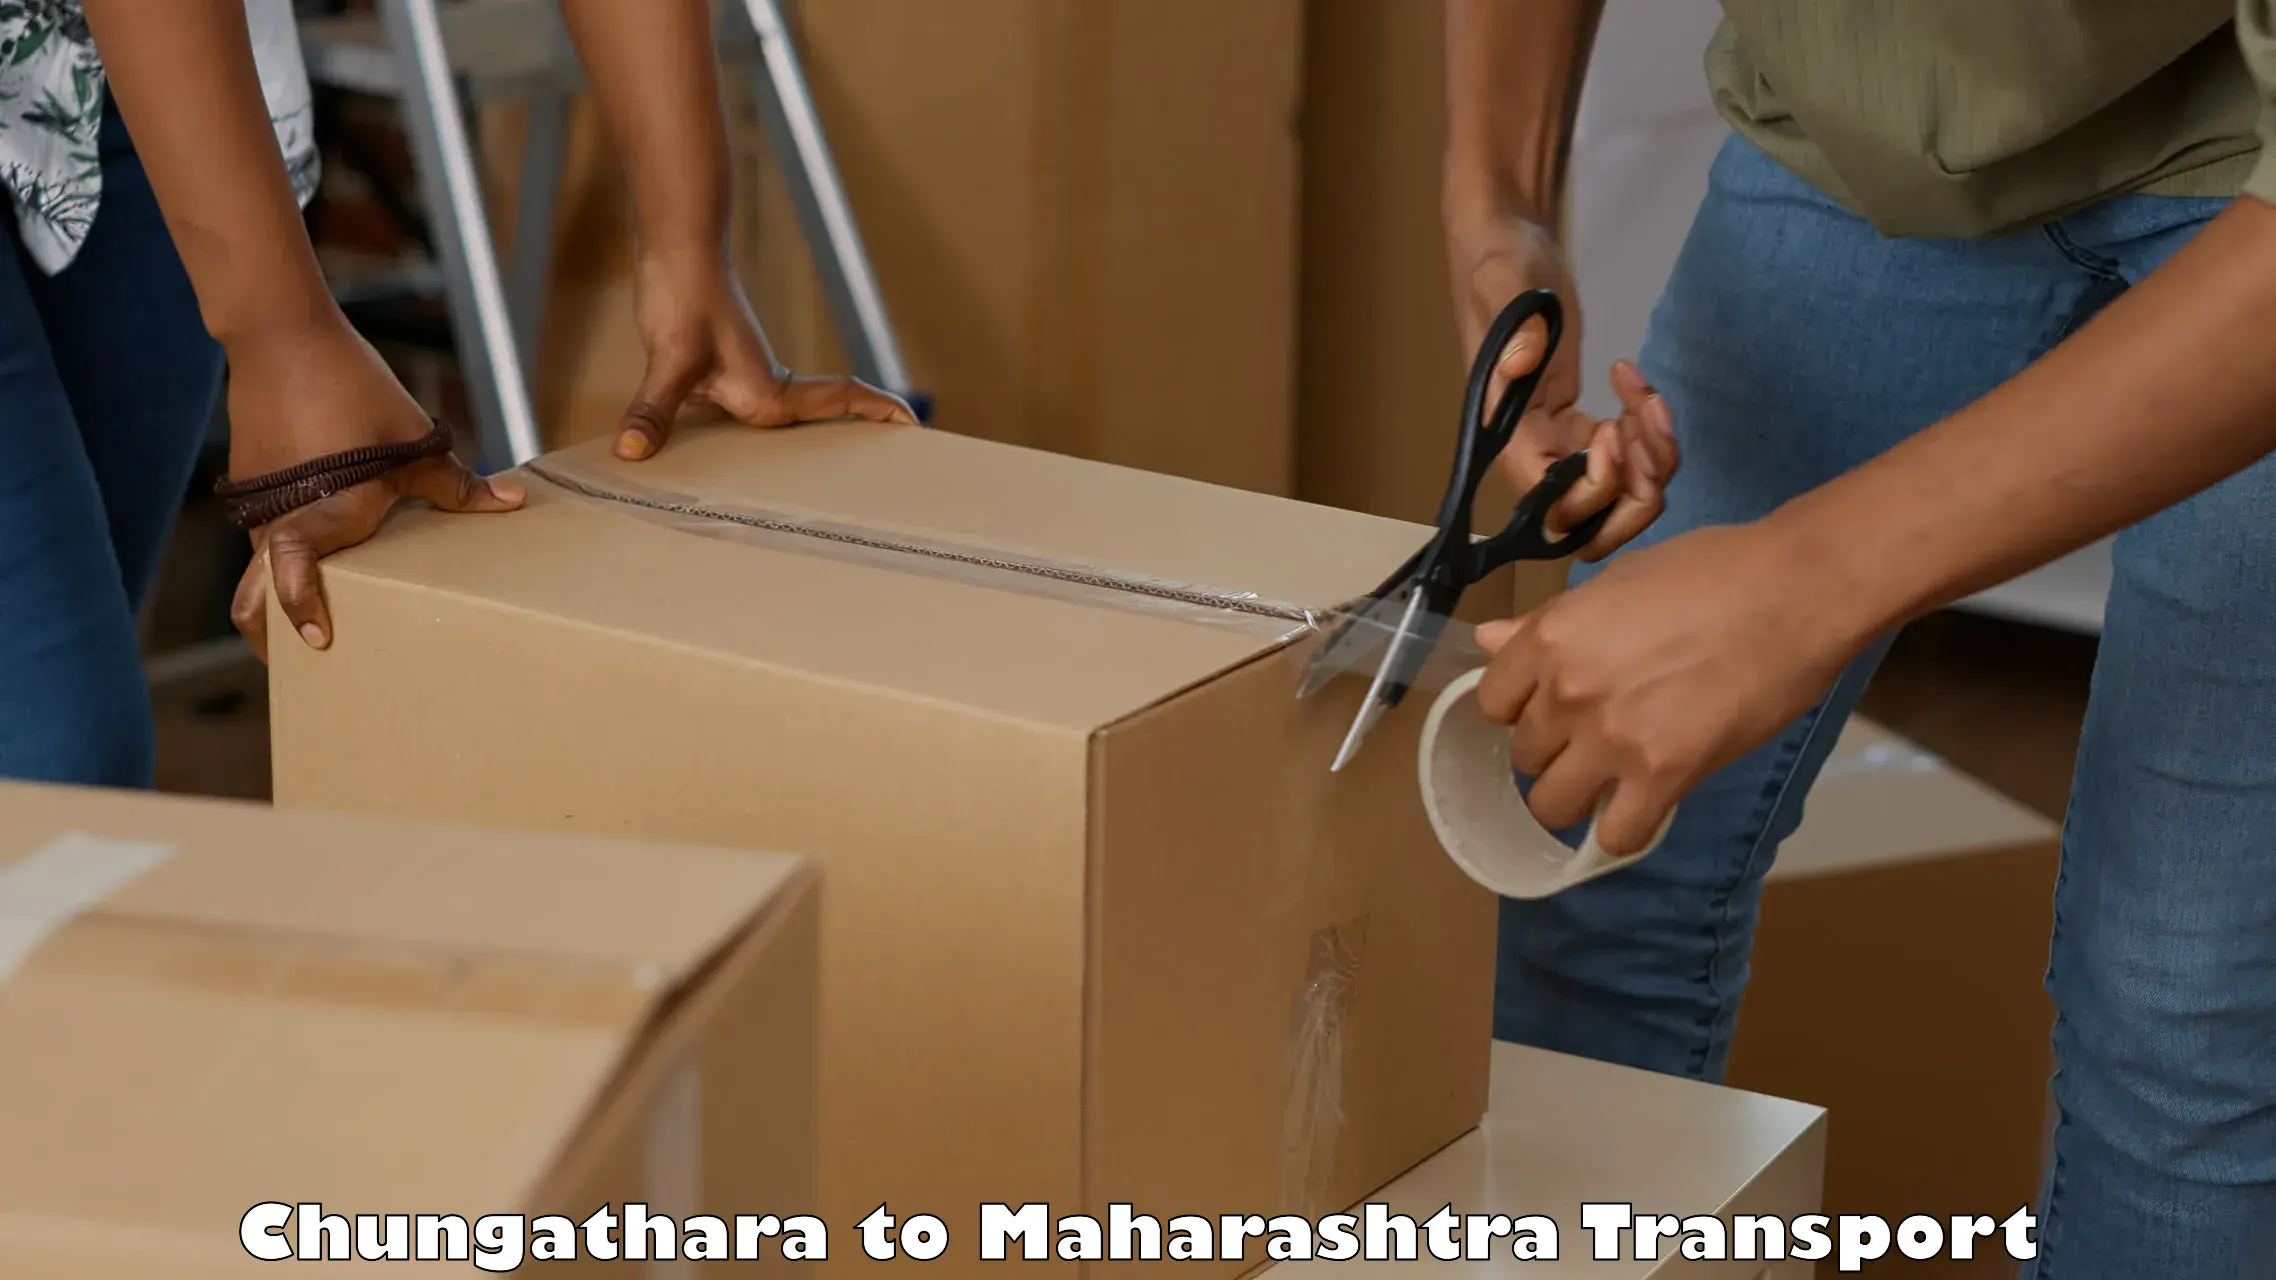 Truck transport companies in India Chungathara to Jalna